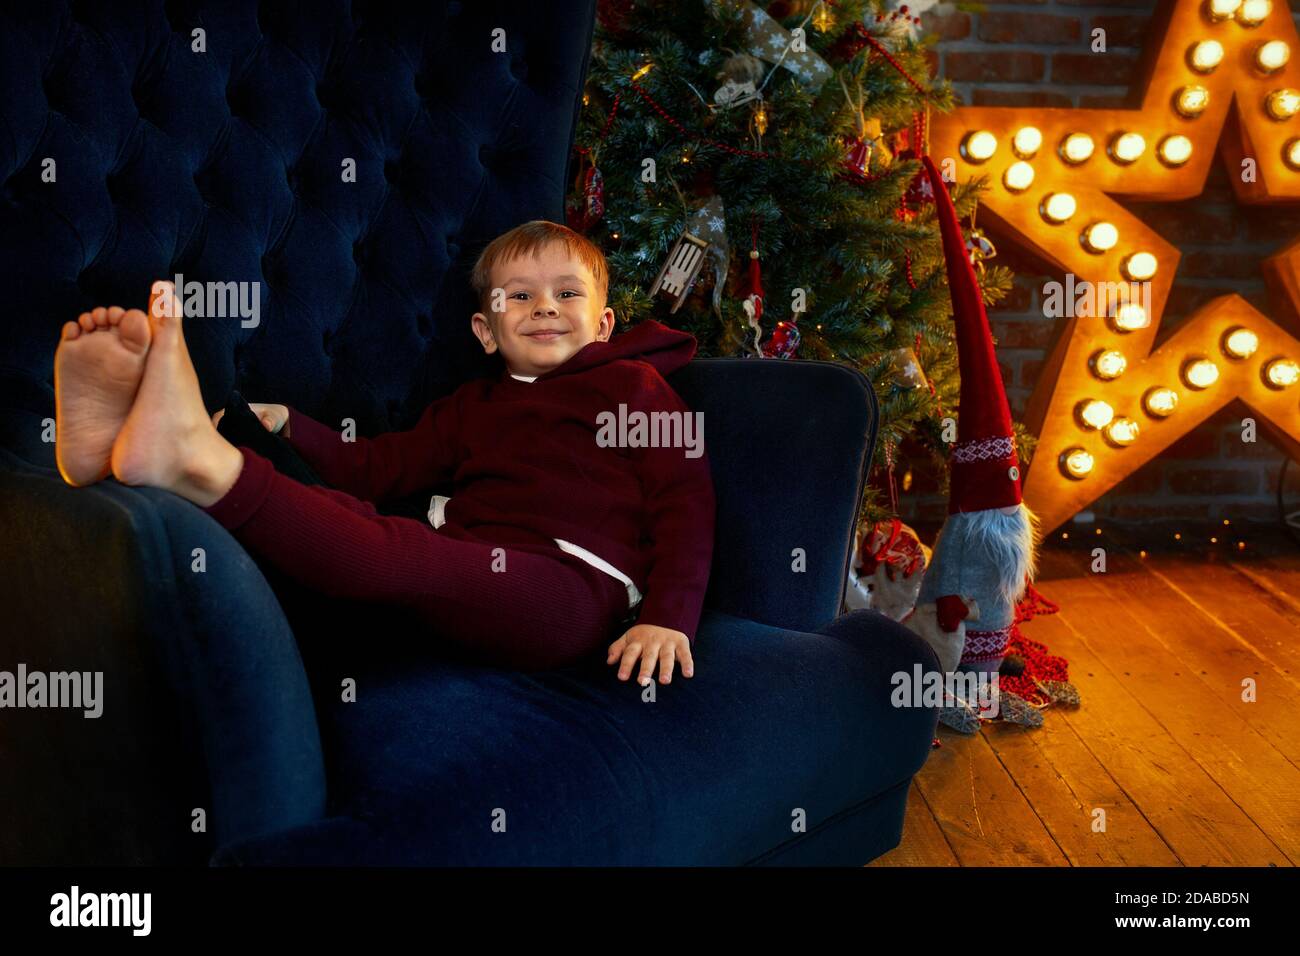 A cheerful and happy boy is lying in a chair. Child waiting for Christmas holidays and gifts Stock Photo